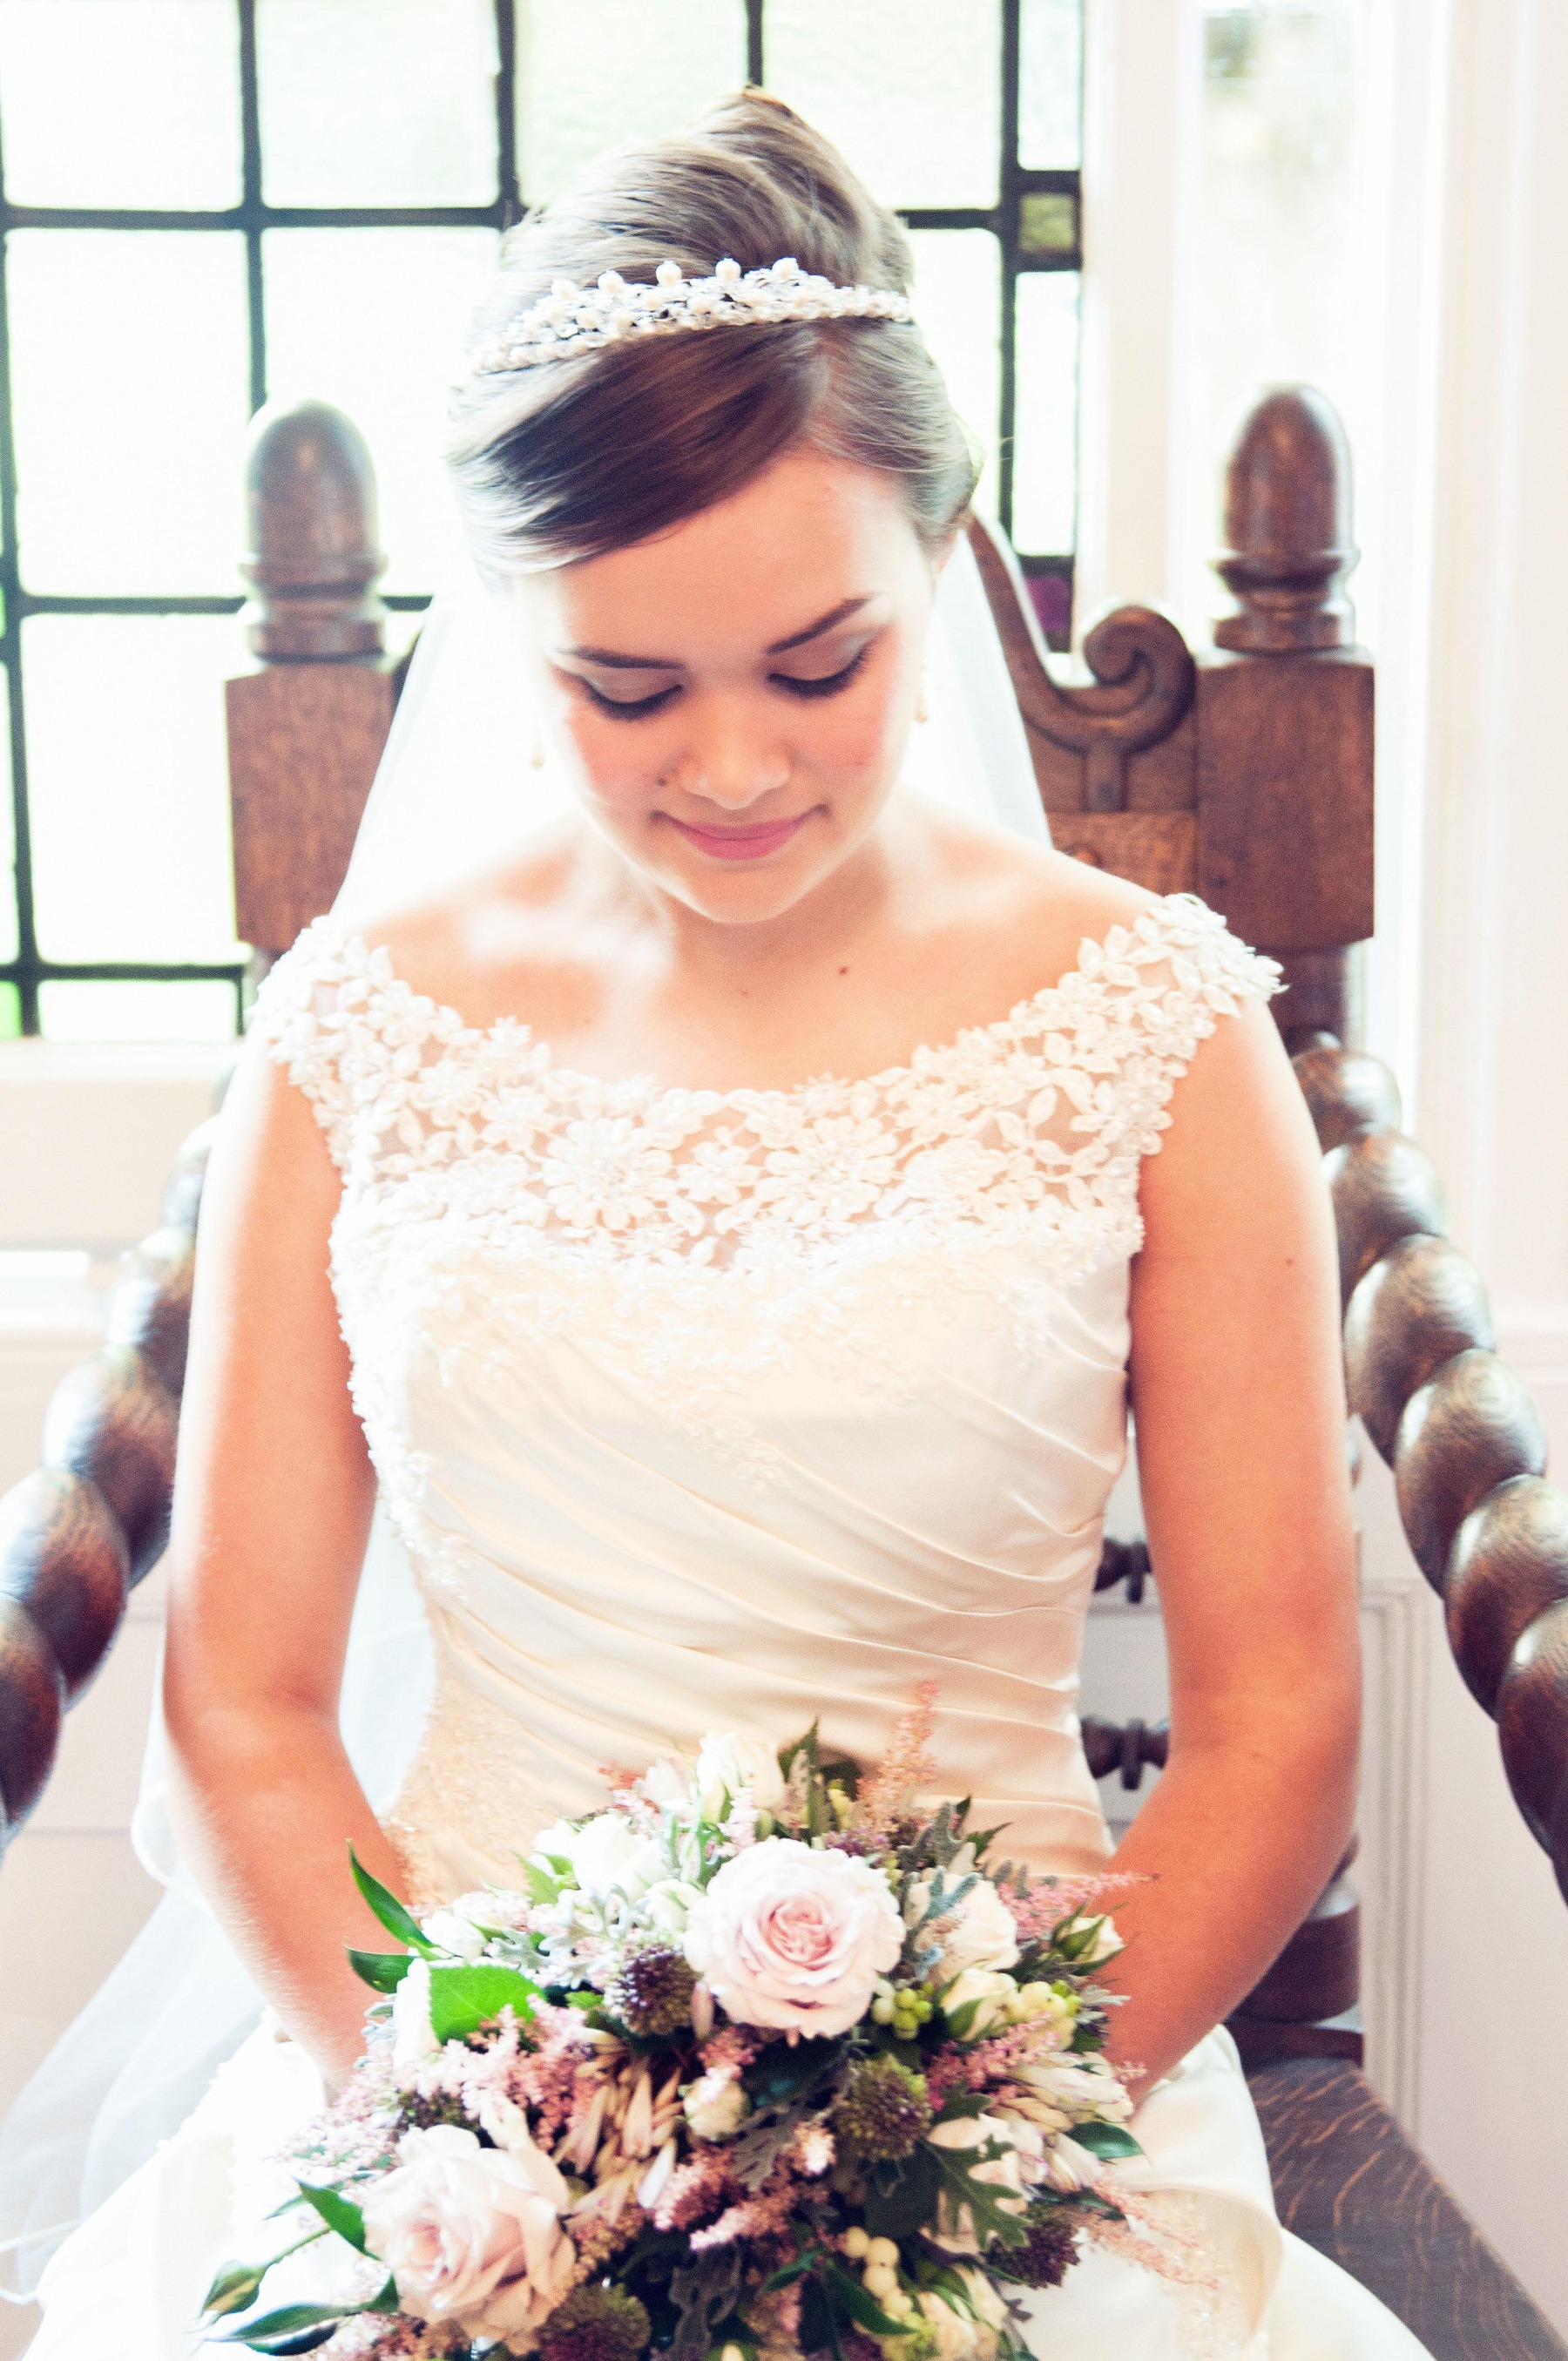 A close up of a bride sitting in the winged chair, holding a bouquet of flowers